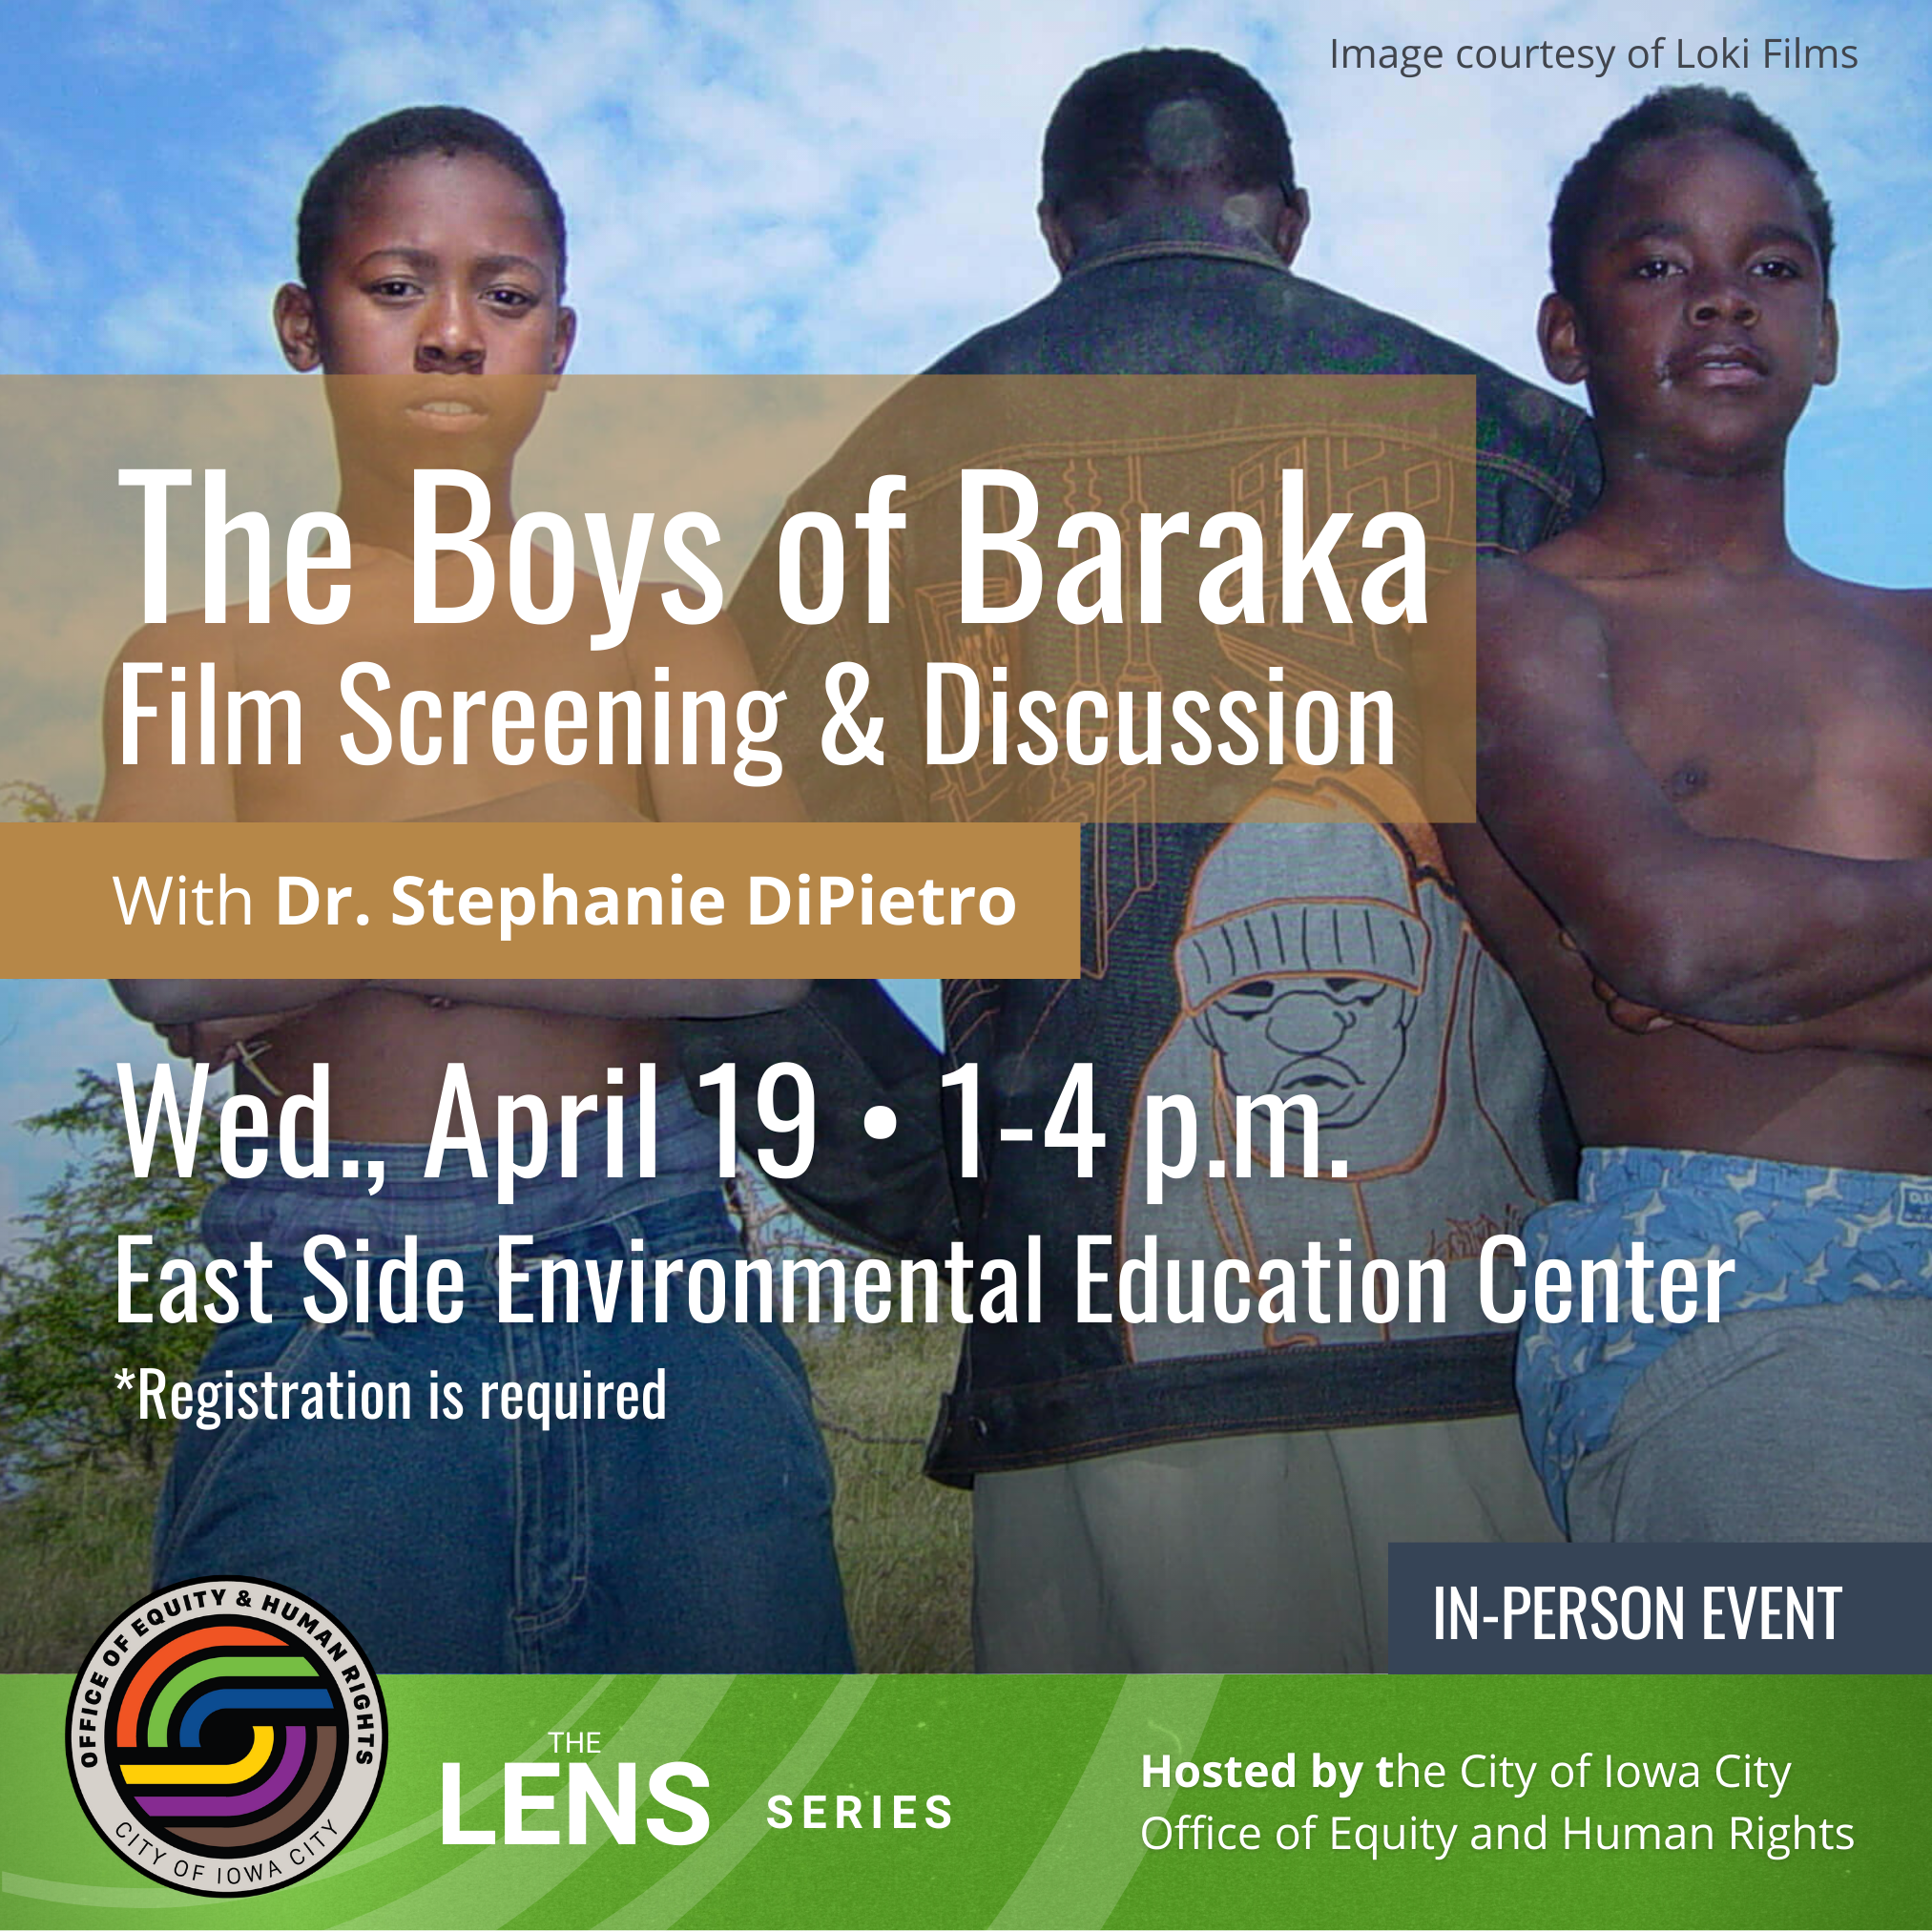 The Boys of Baraka with Commentary and Discussion by Dr. Stephanie Dipietro